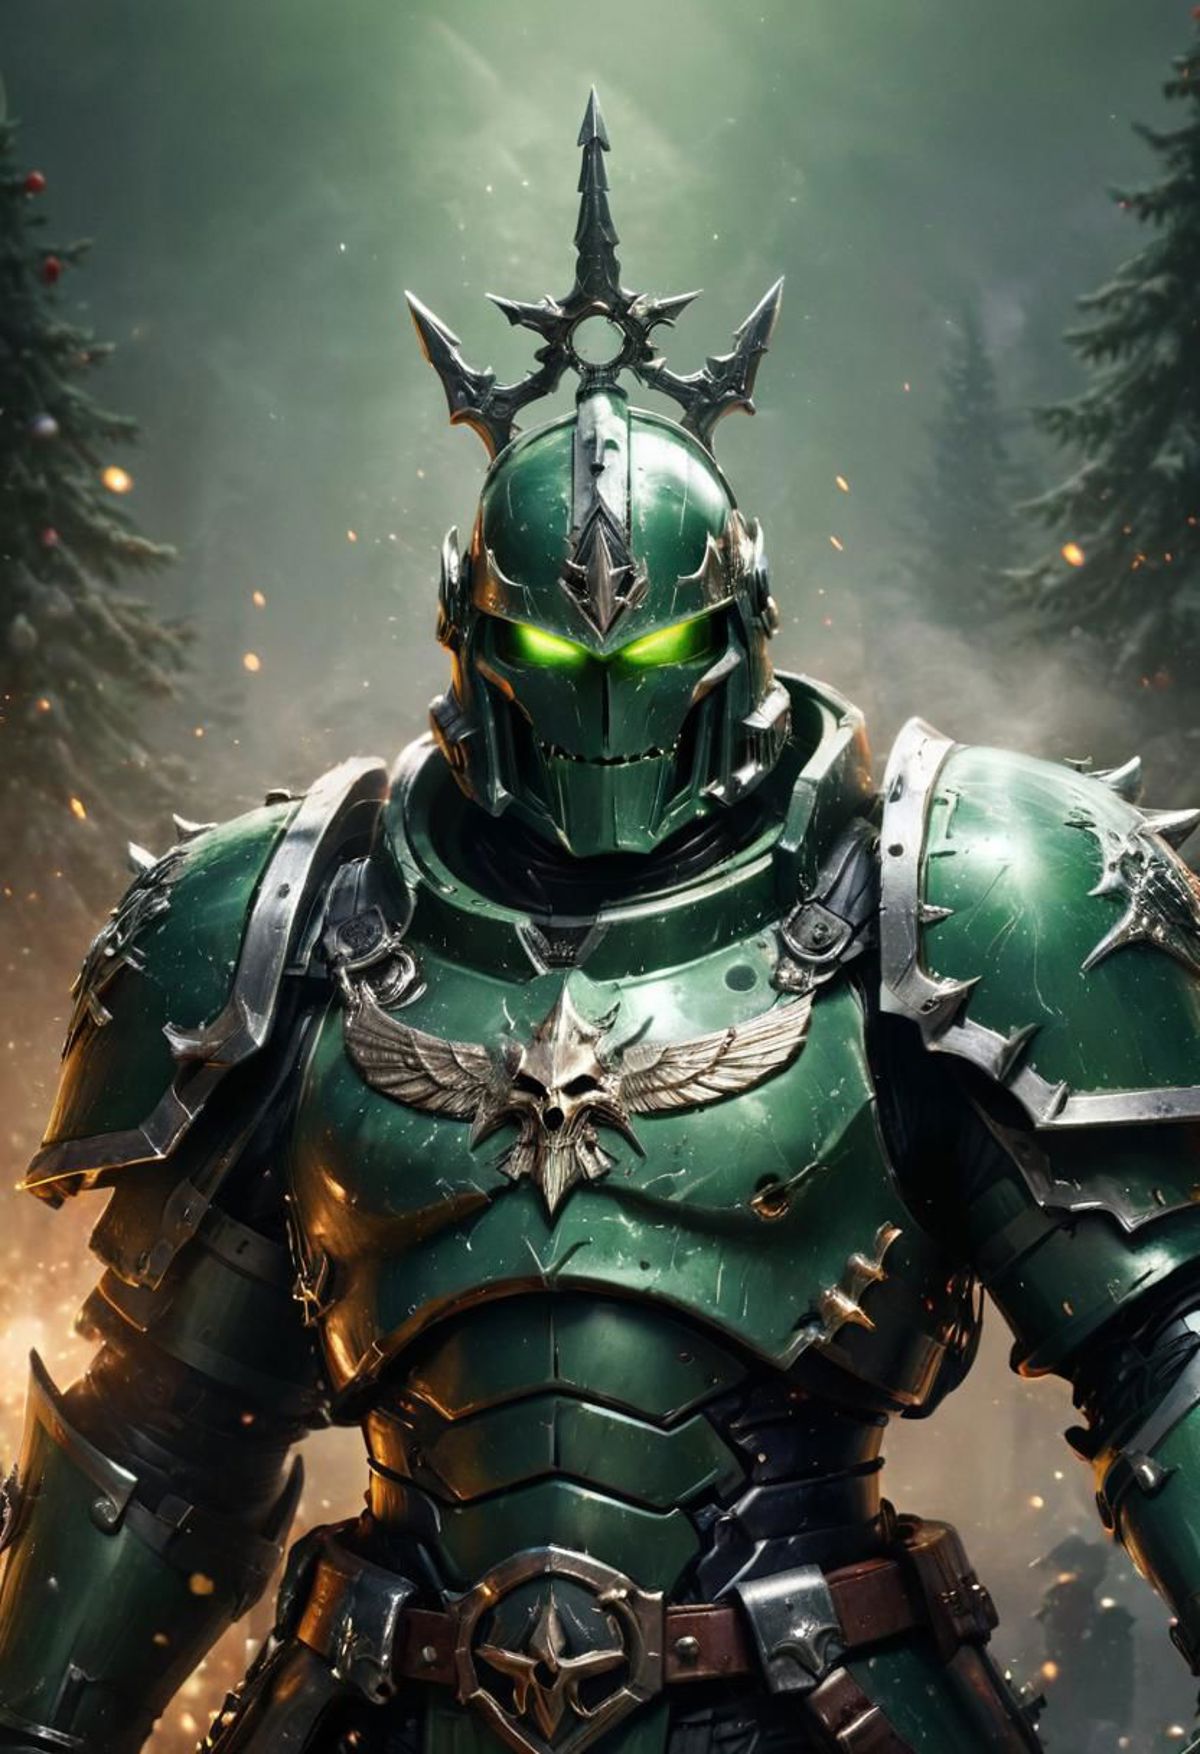 A green warrior wearing a metal helmet with spikes on his head.